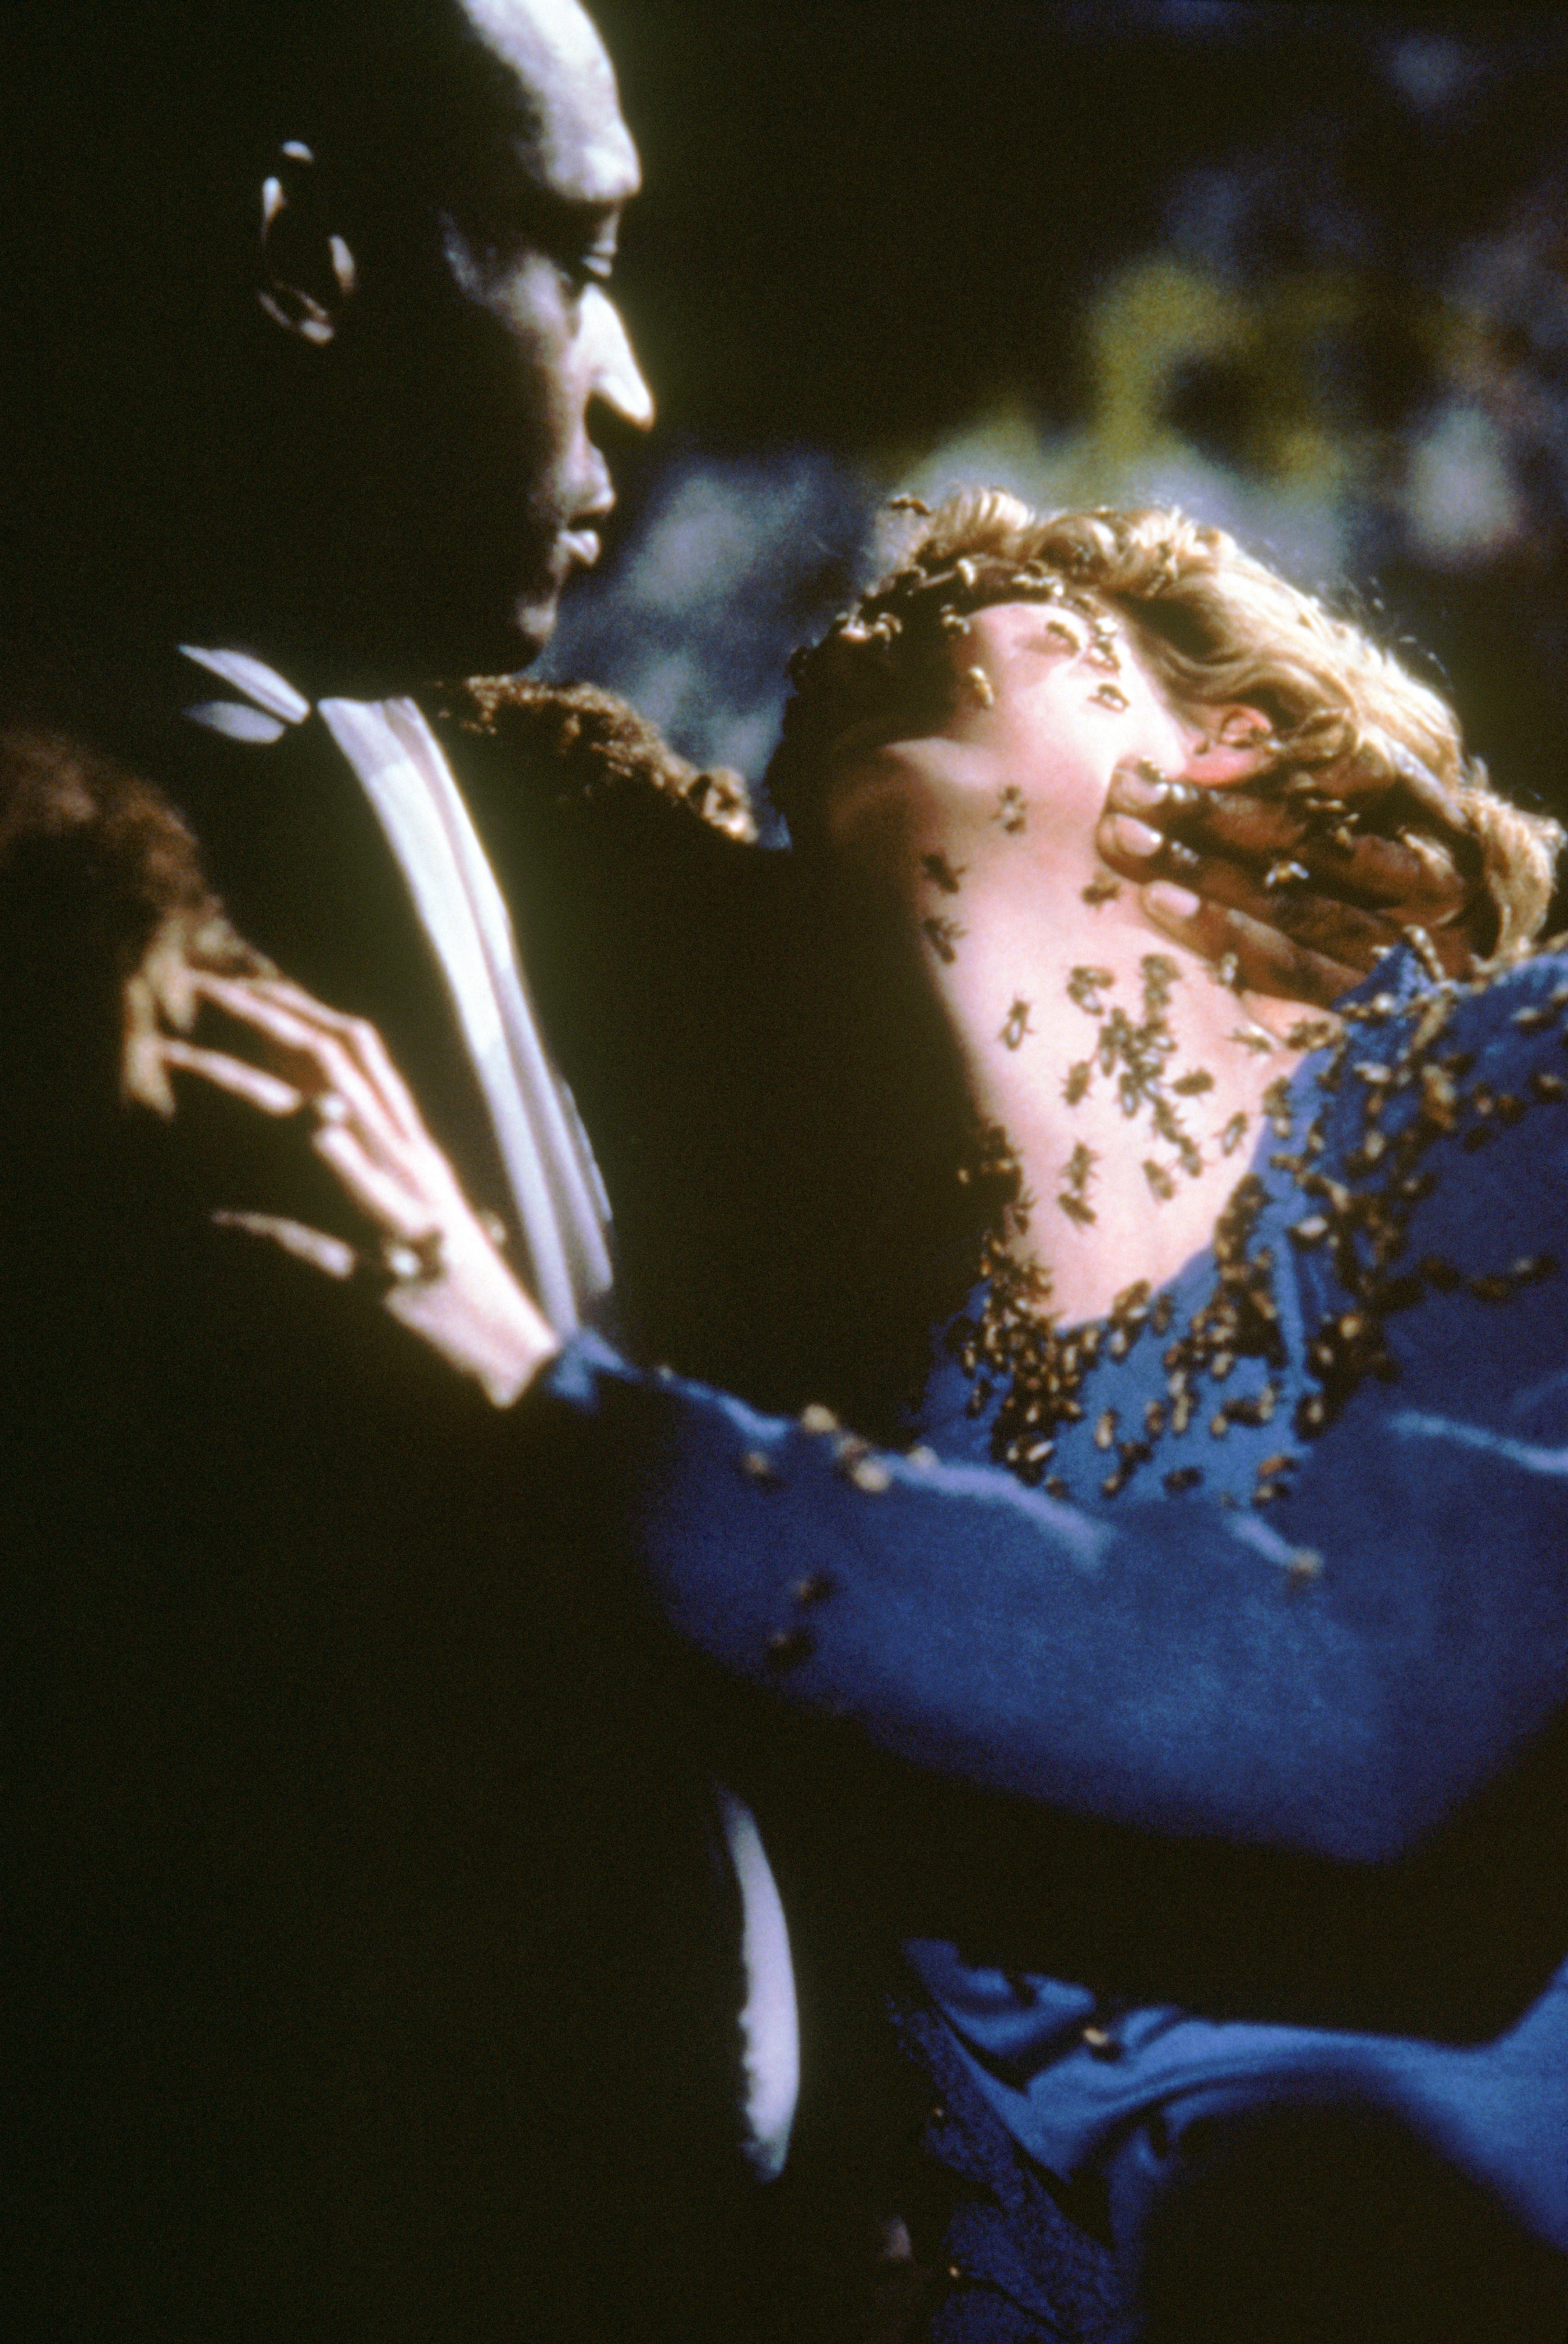 Candyman embracing a woman covered with bees